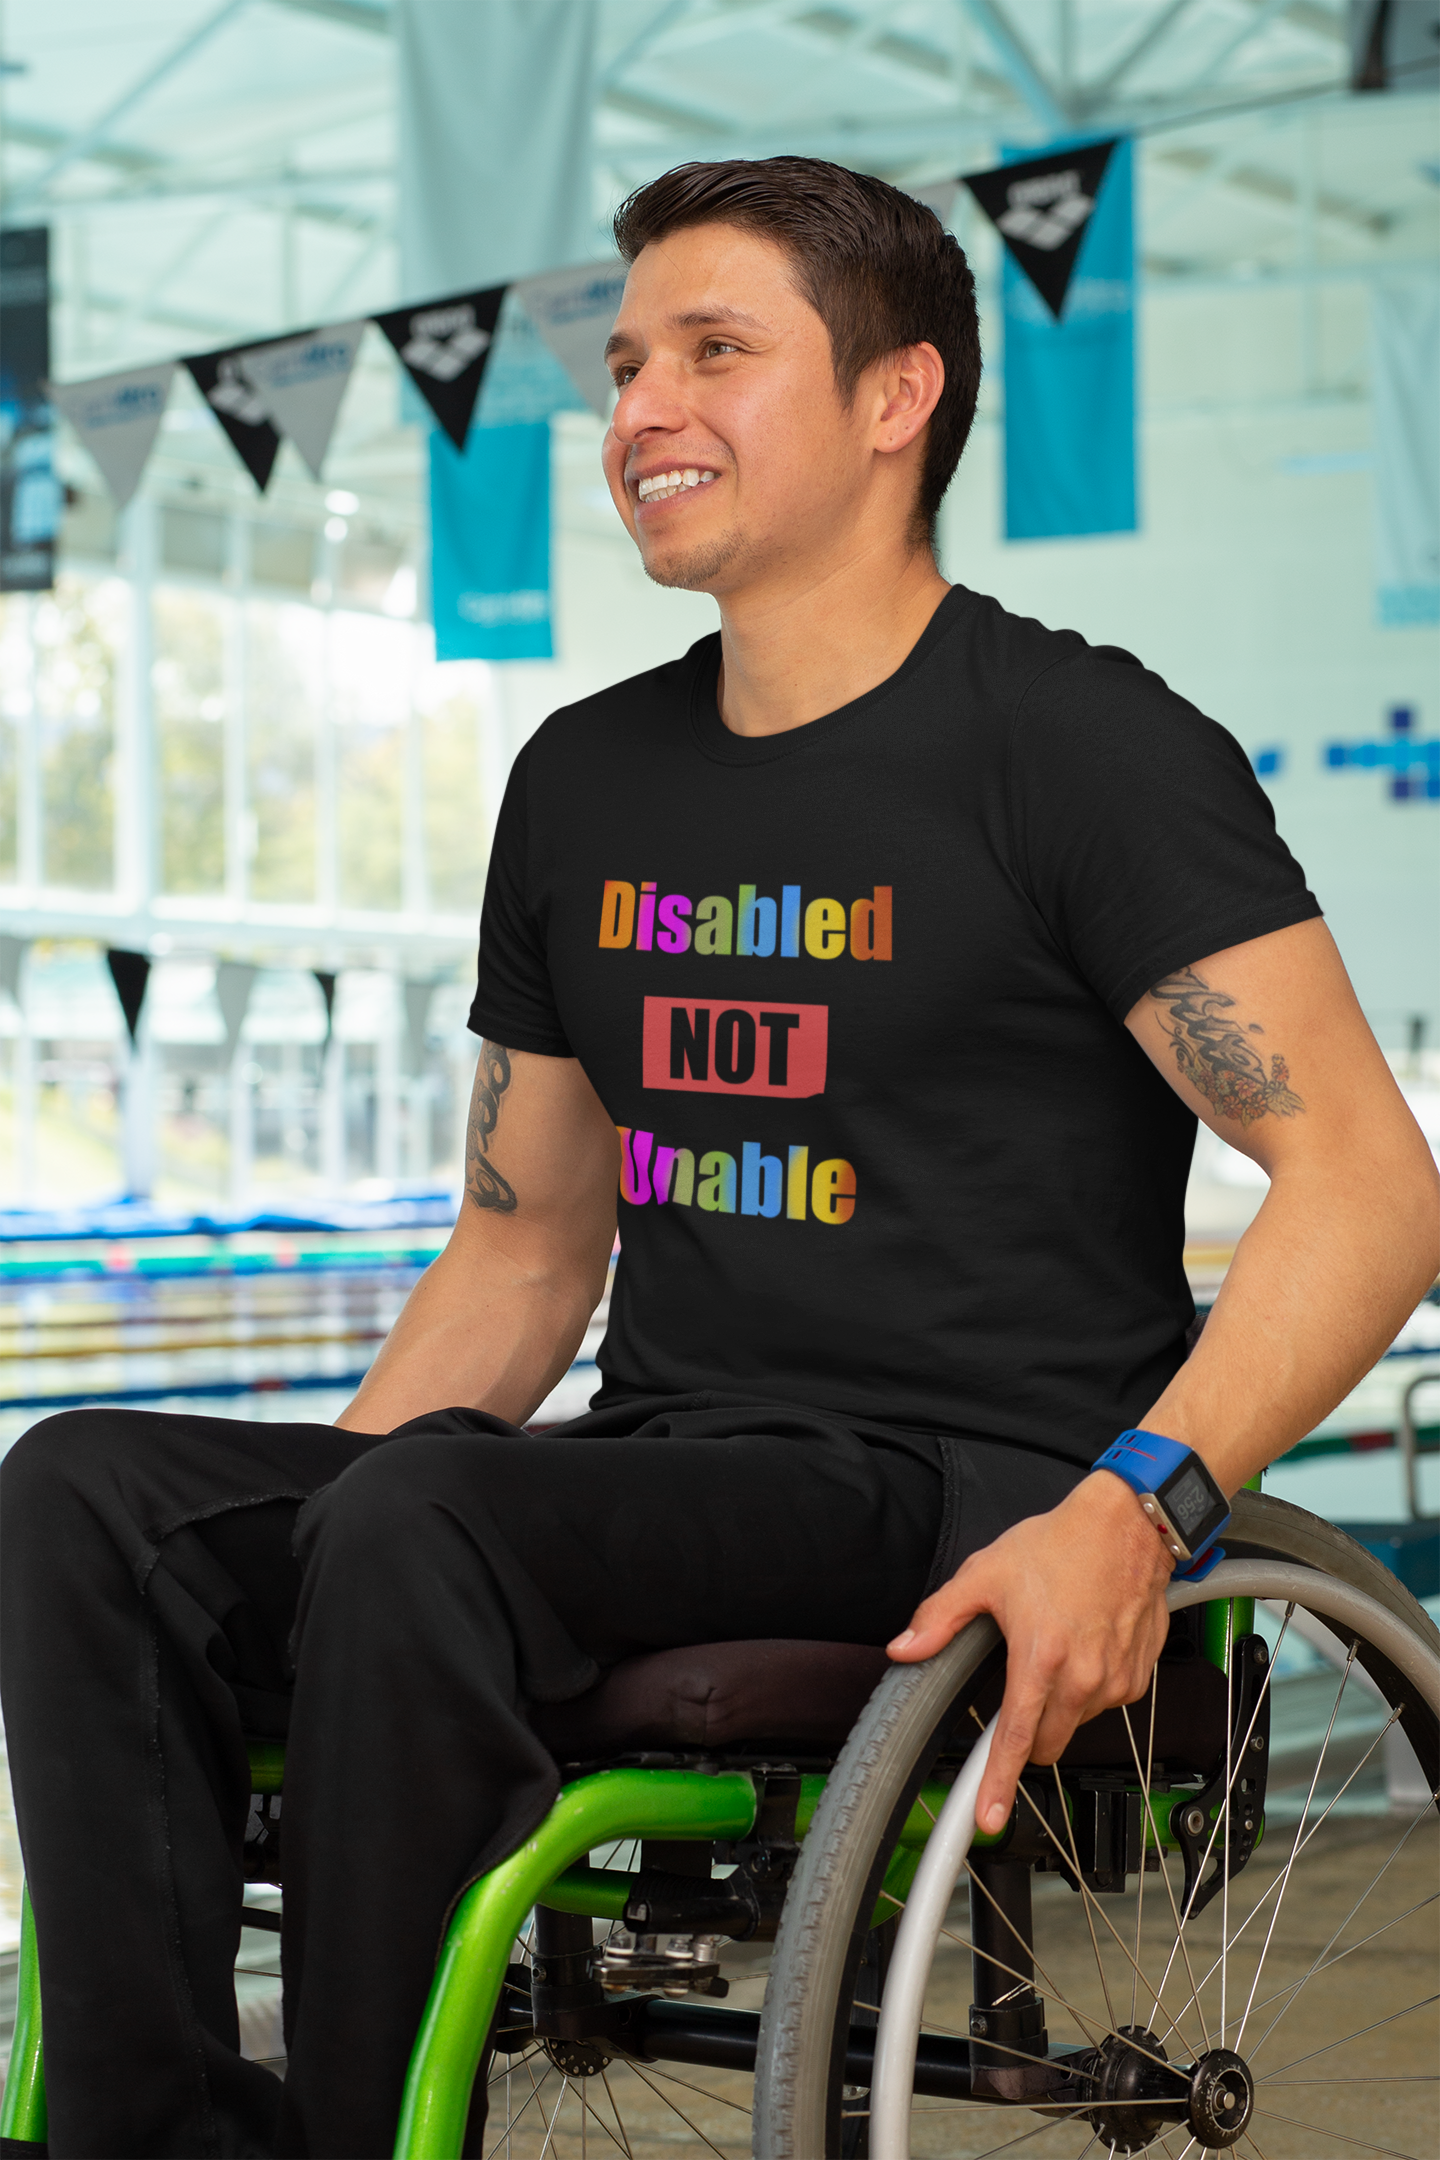 Disabled Not Unable - Short-sleeve unisex t-shirt